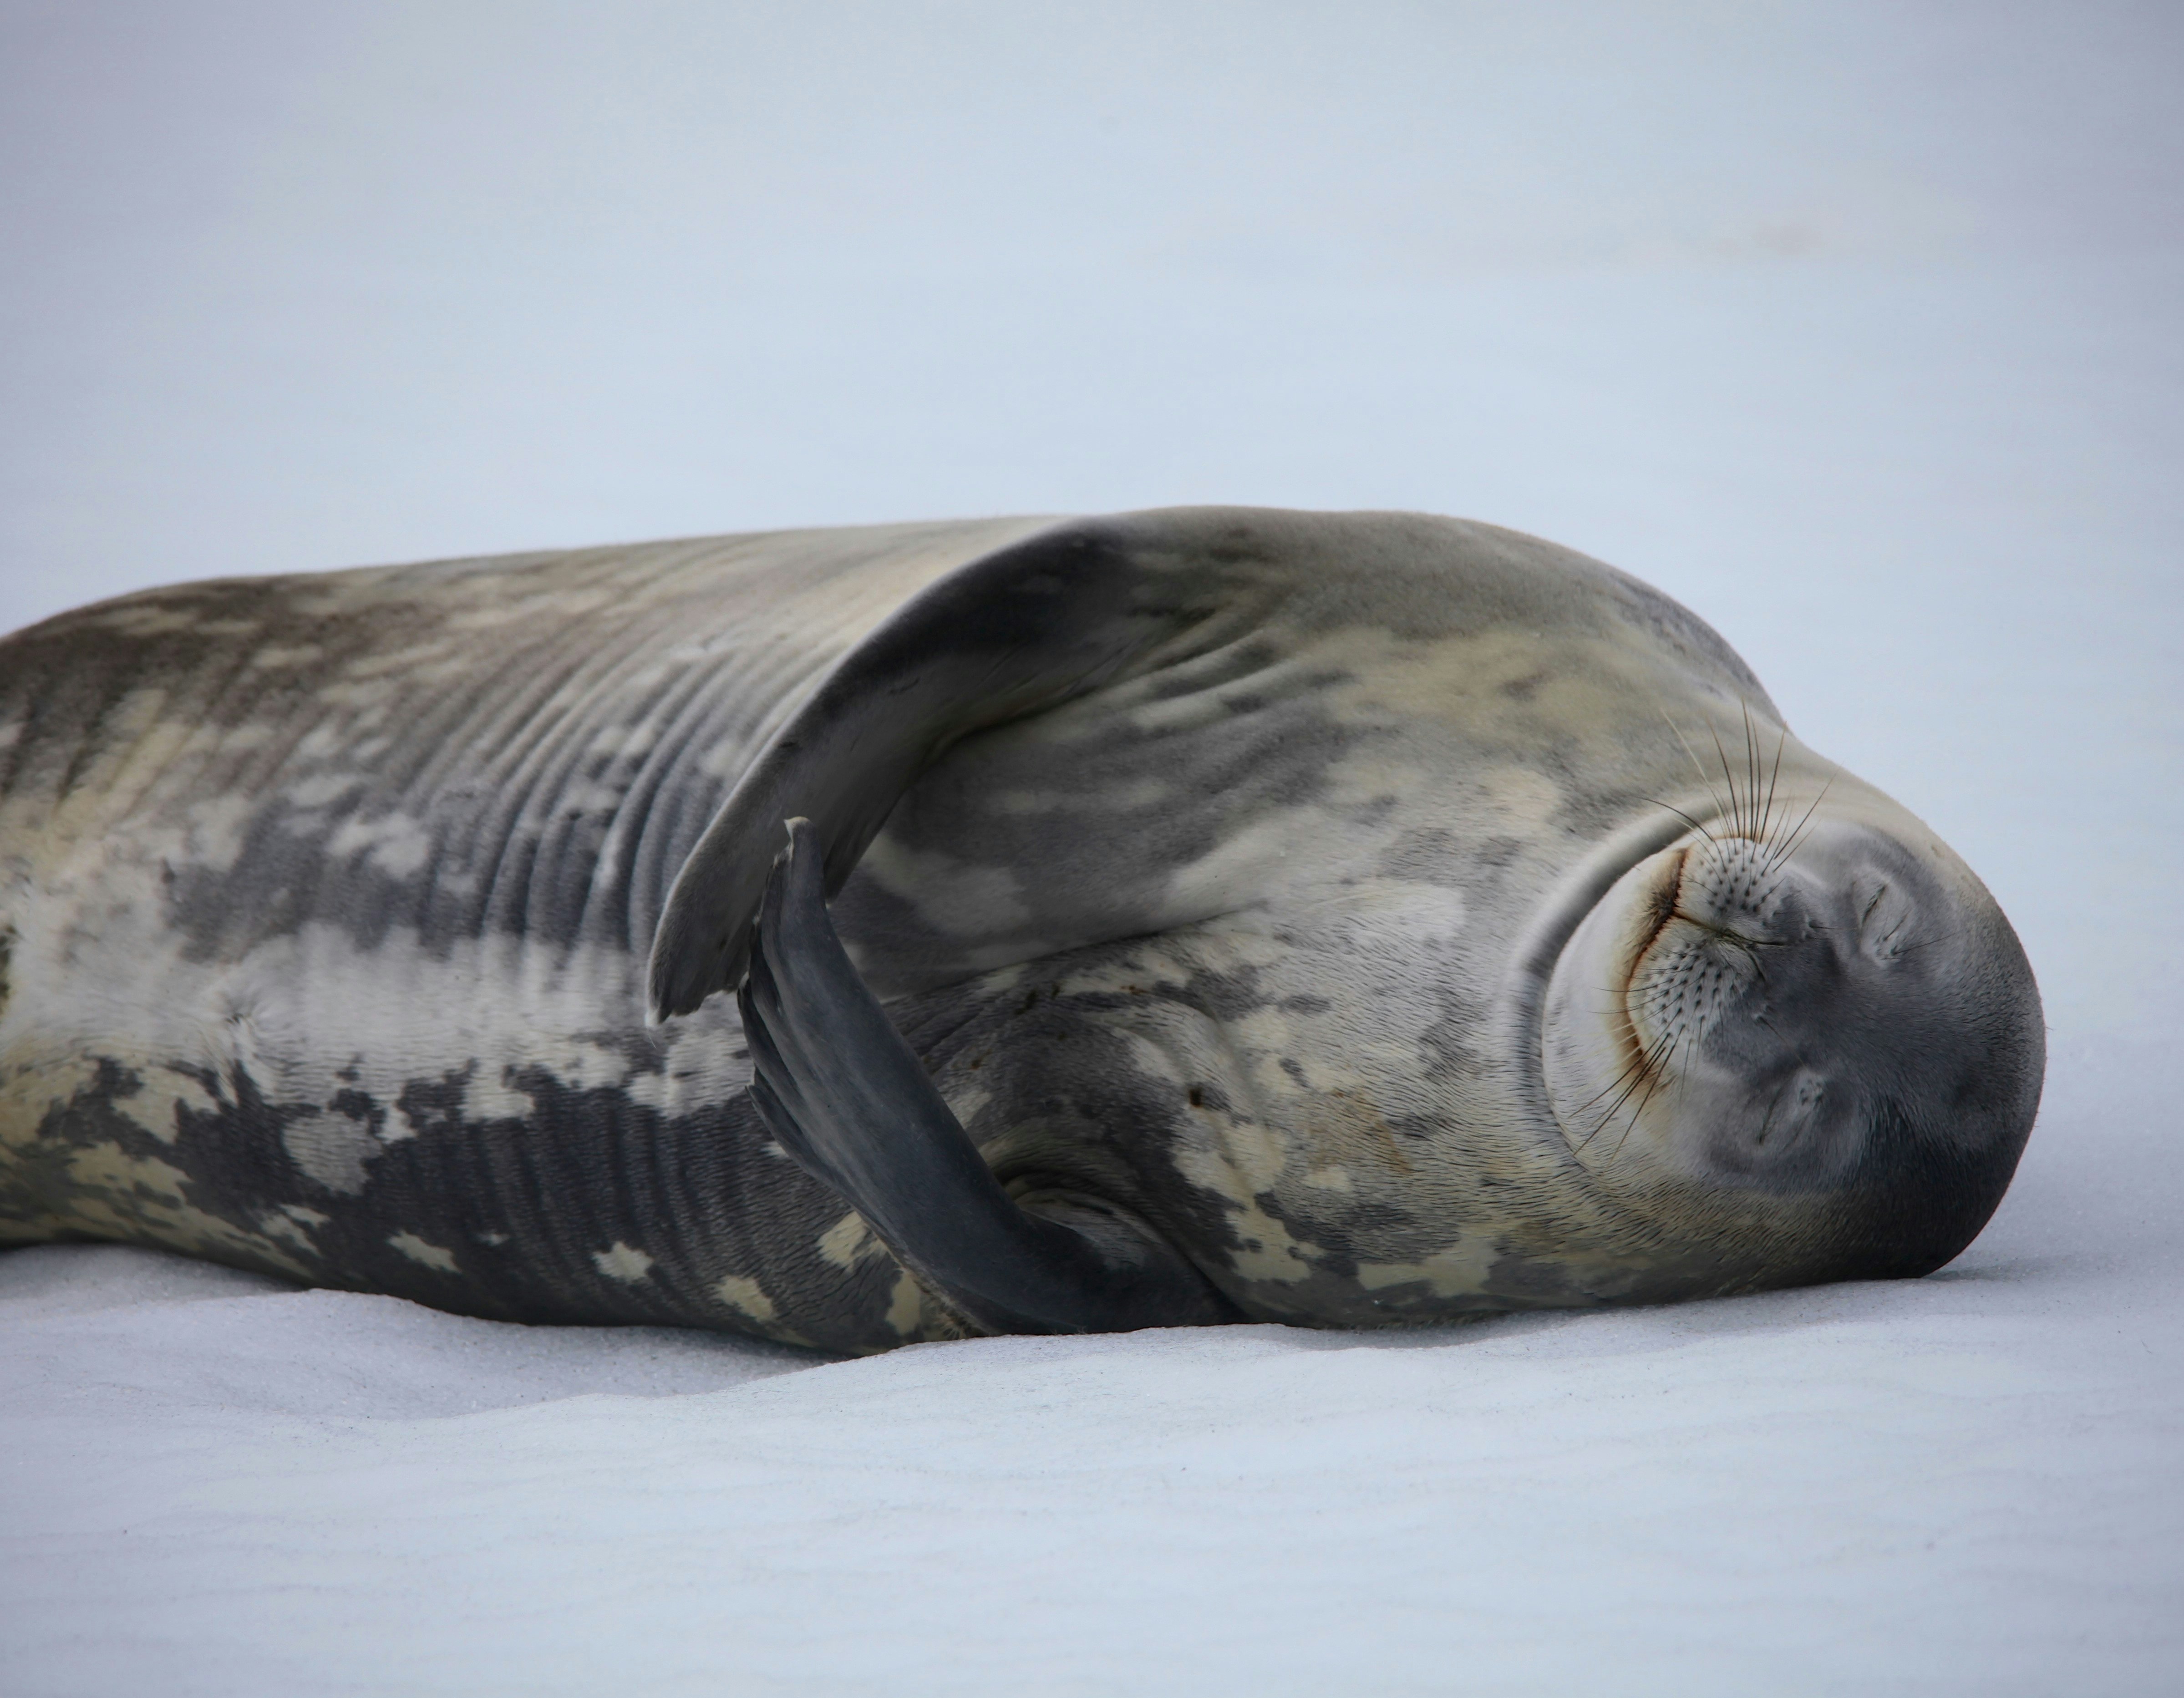 A large seal sleeps happily on its back in the snow.